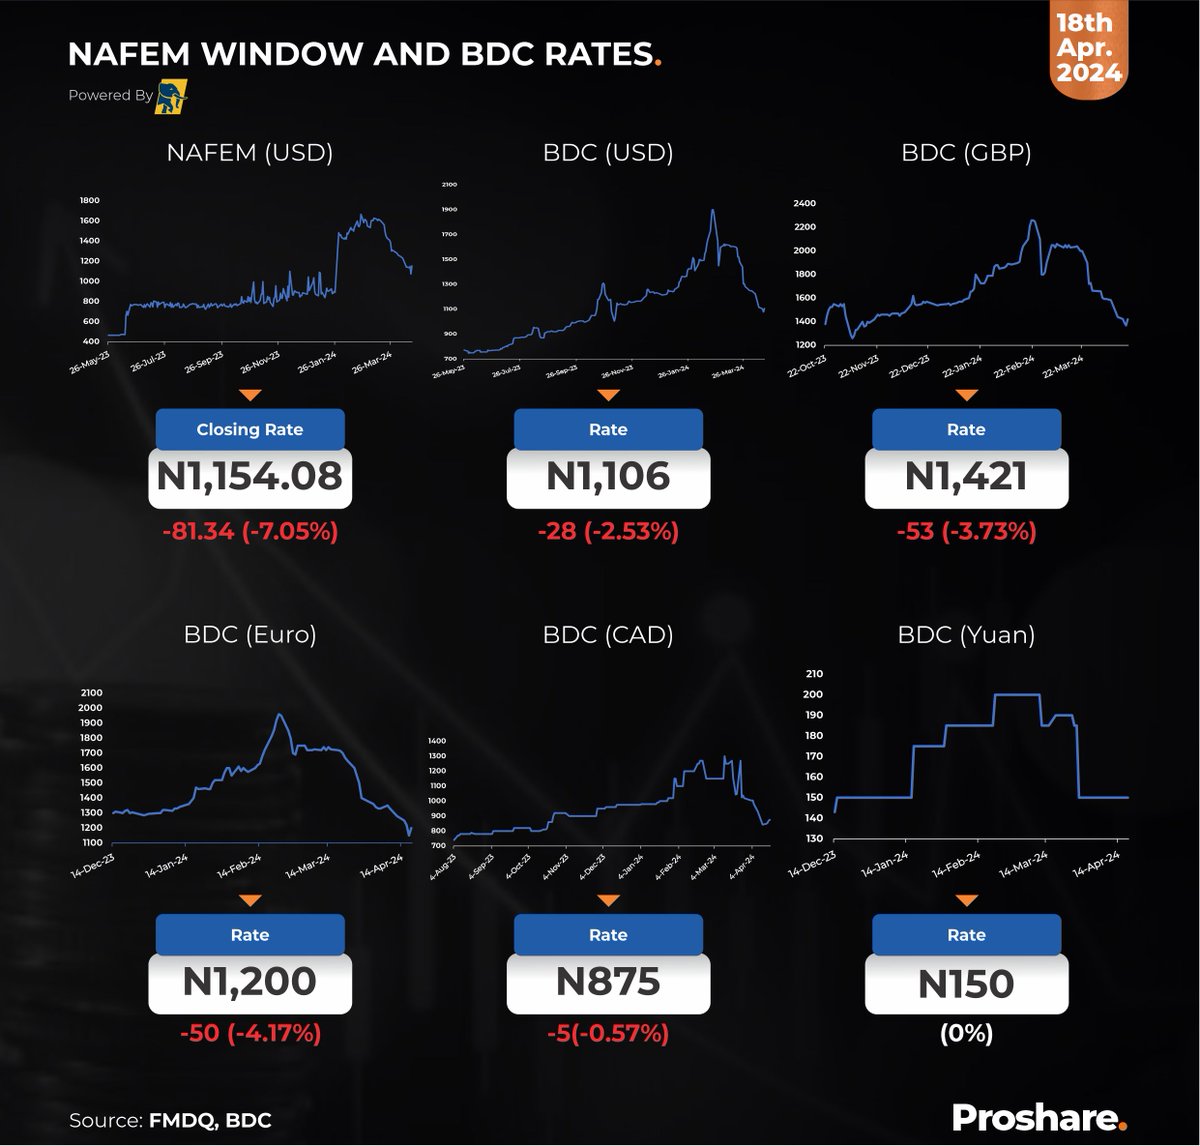 NAFEM Window and BDC (USD, GBP, CAD, EURO & YUAN) Rates – April 18, 2024 Closing Rate - N1,154.08 BDC Rate - N1,106 GBP Rate - N1,421 EURO Rate - N1,200 CAD Rate - N875 YUAN Rate - N150 Compare more currencies via proshare.co/exchangerates #AskProshare #ExchangeRates